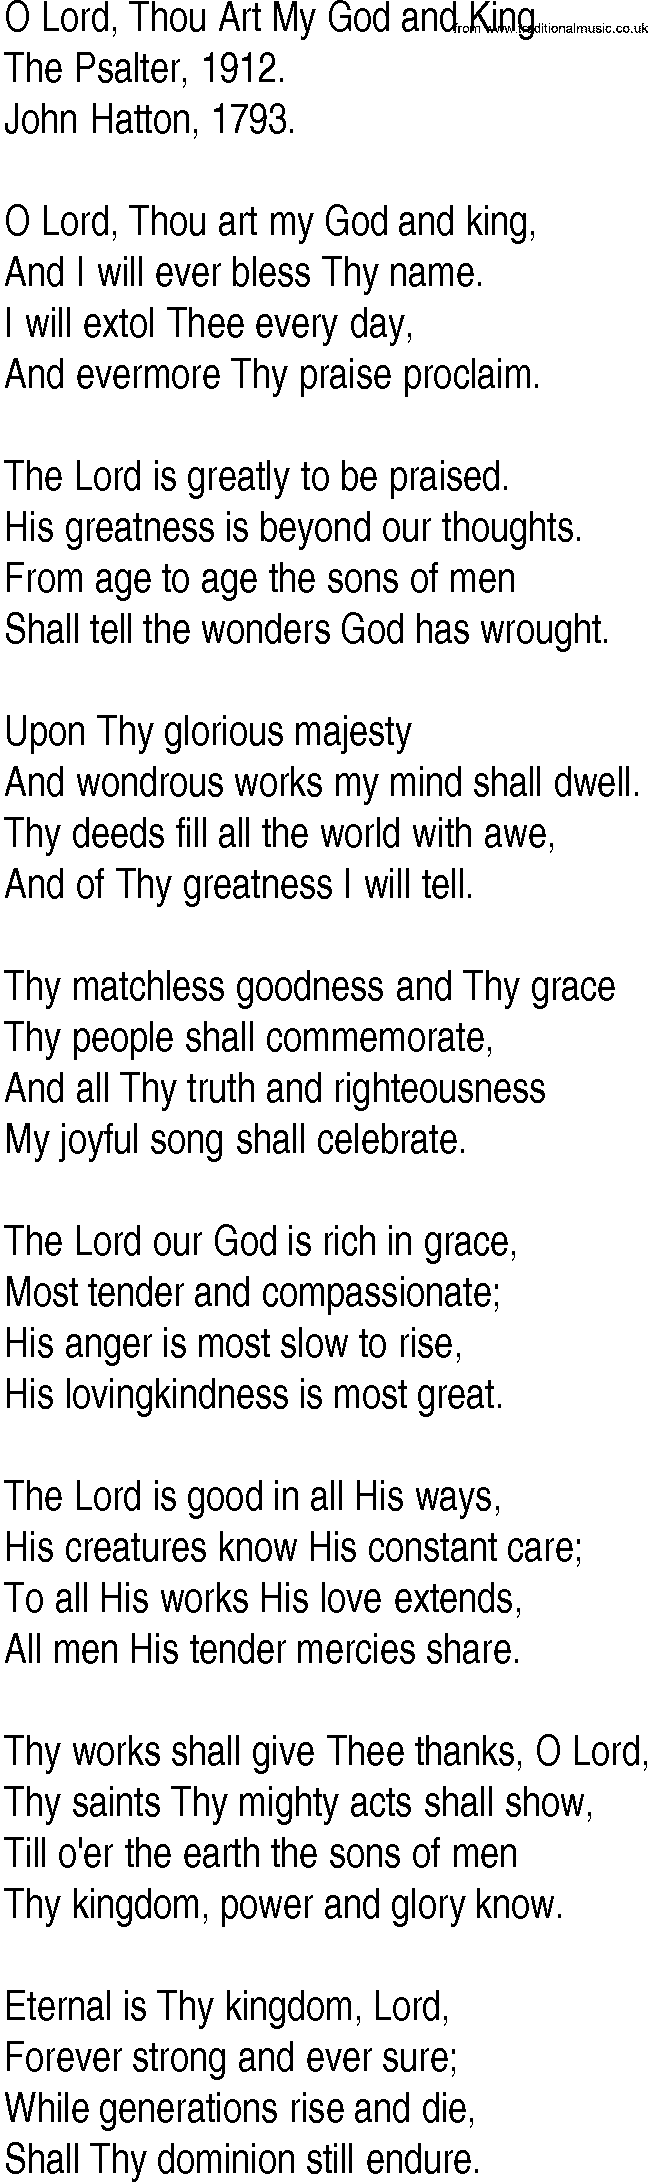 Hymn and Gospel Song: O Lord, Thou Art My God and King by The Psalter lyrics